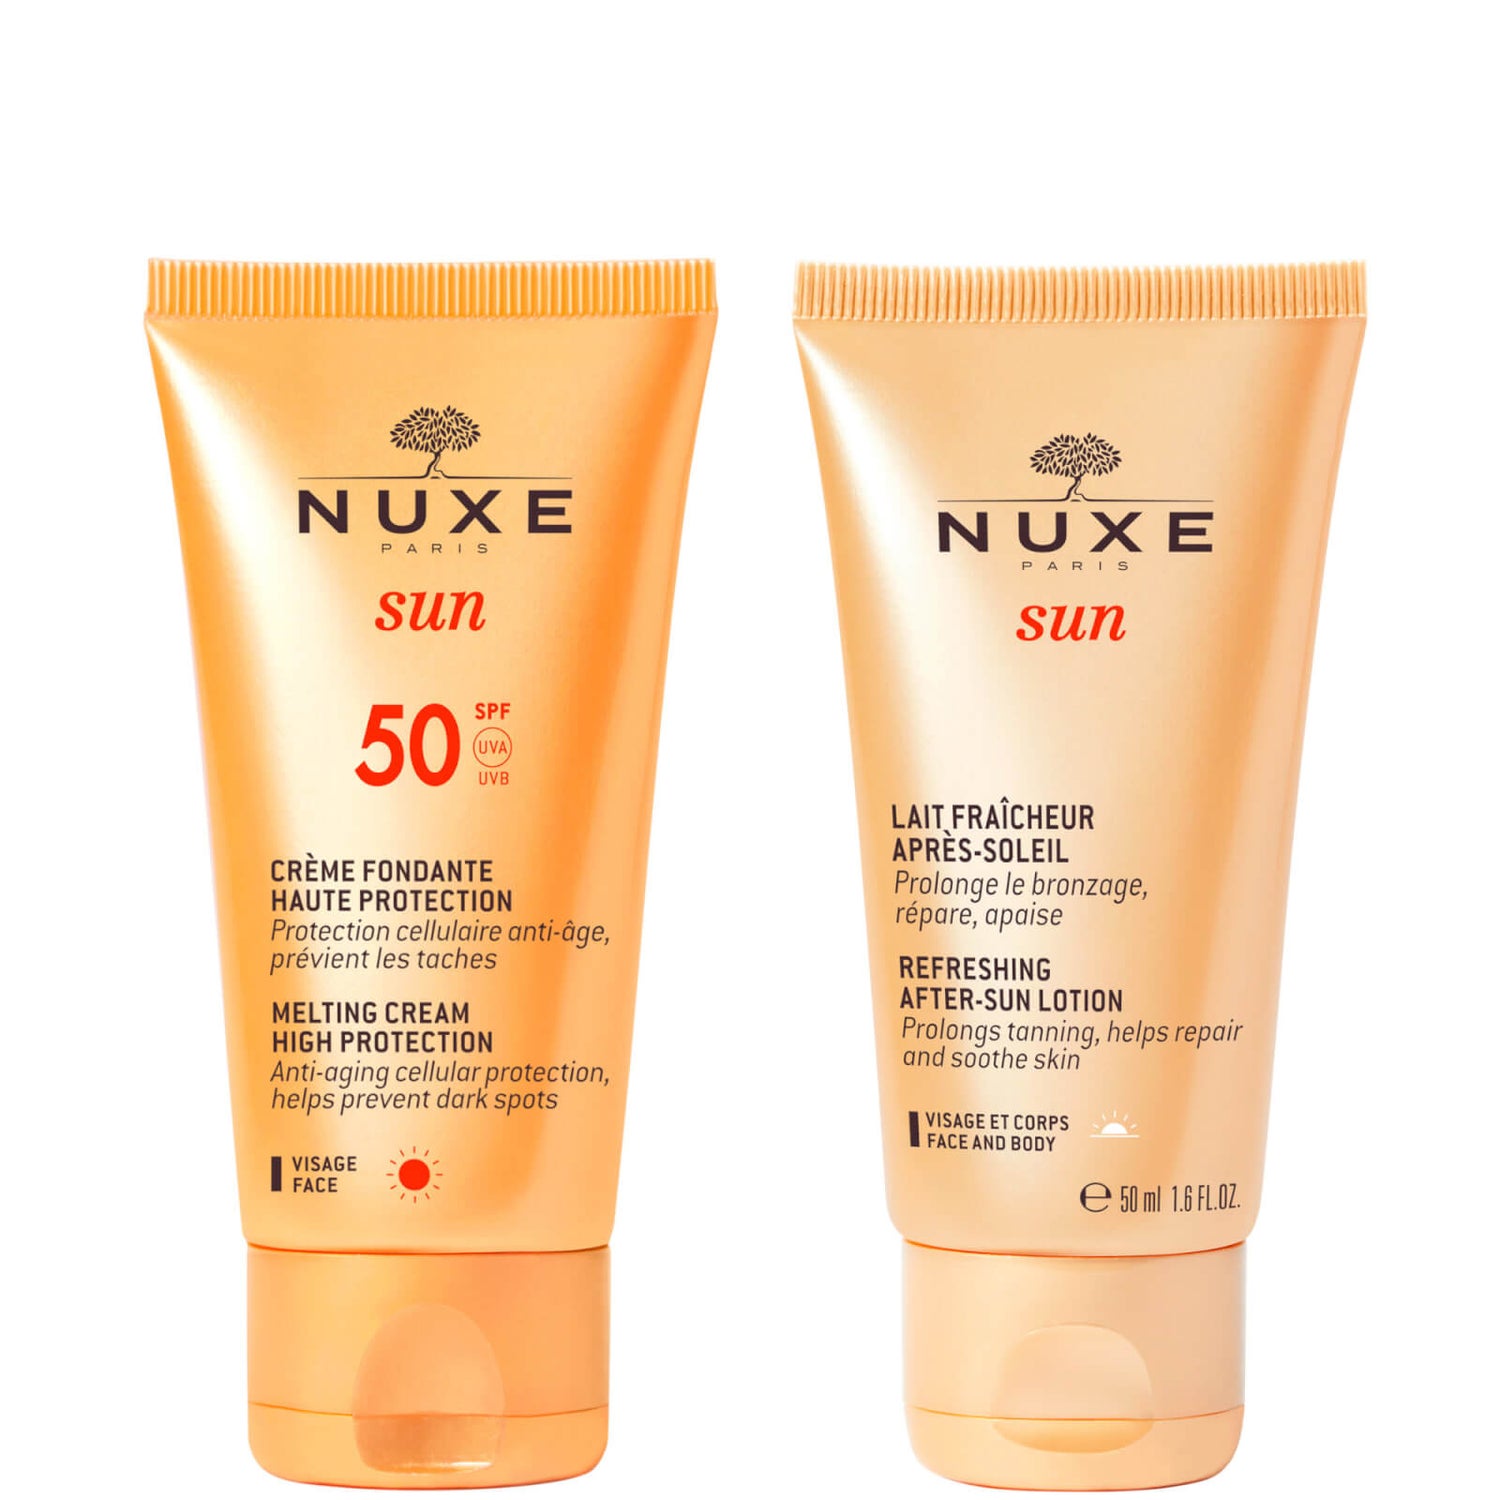 NUXE Sun Care SPF50 and Aftersun Set (Worth £22.87)